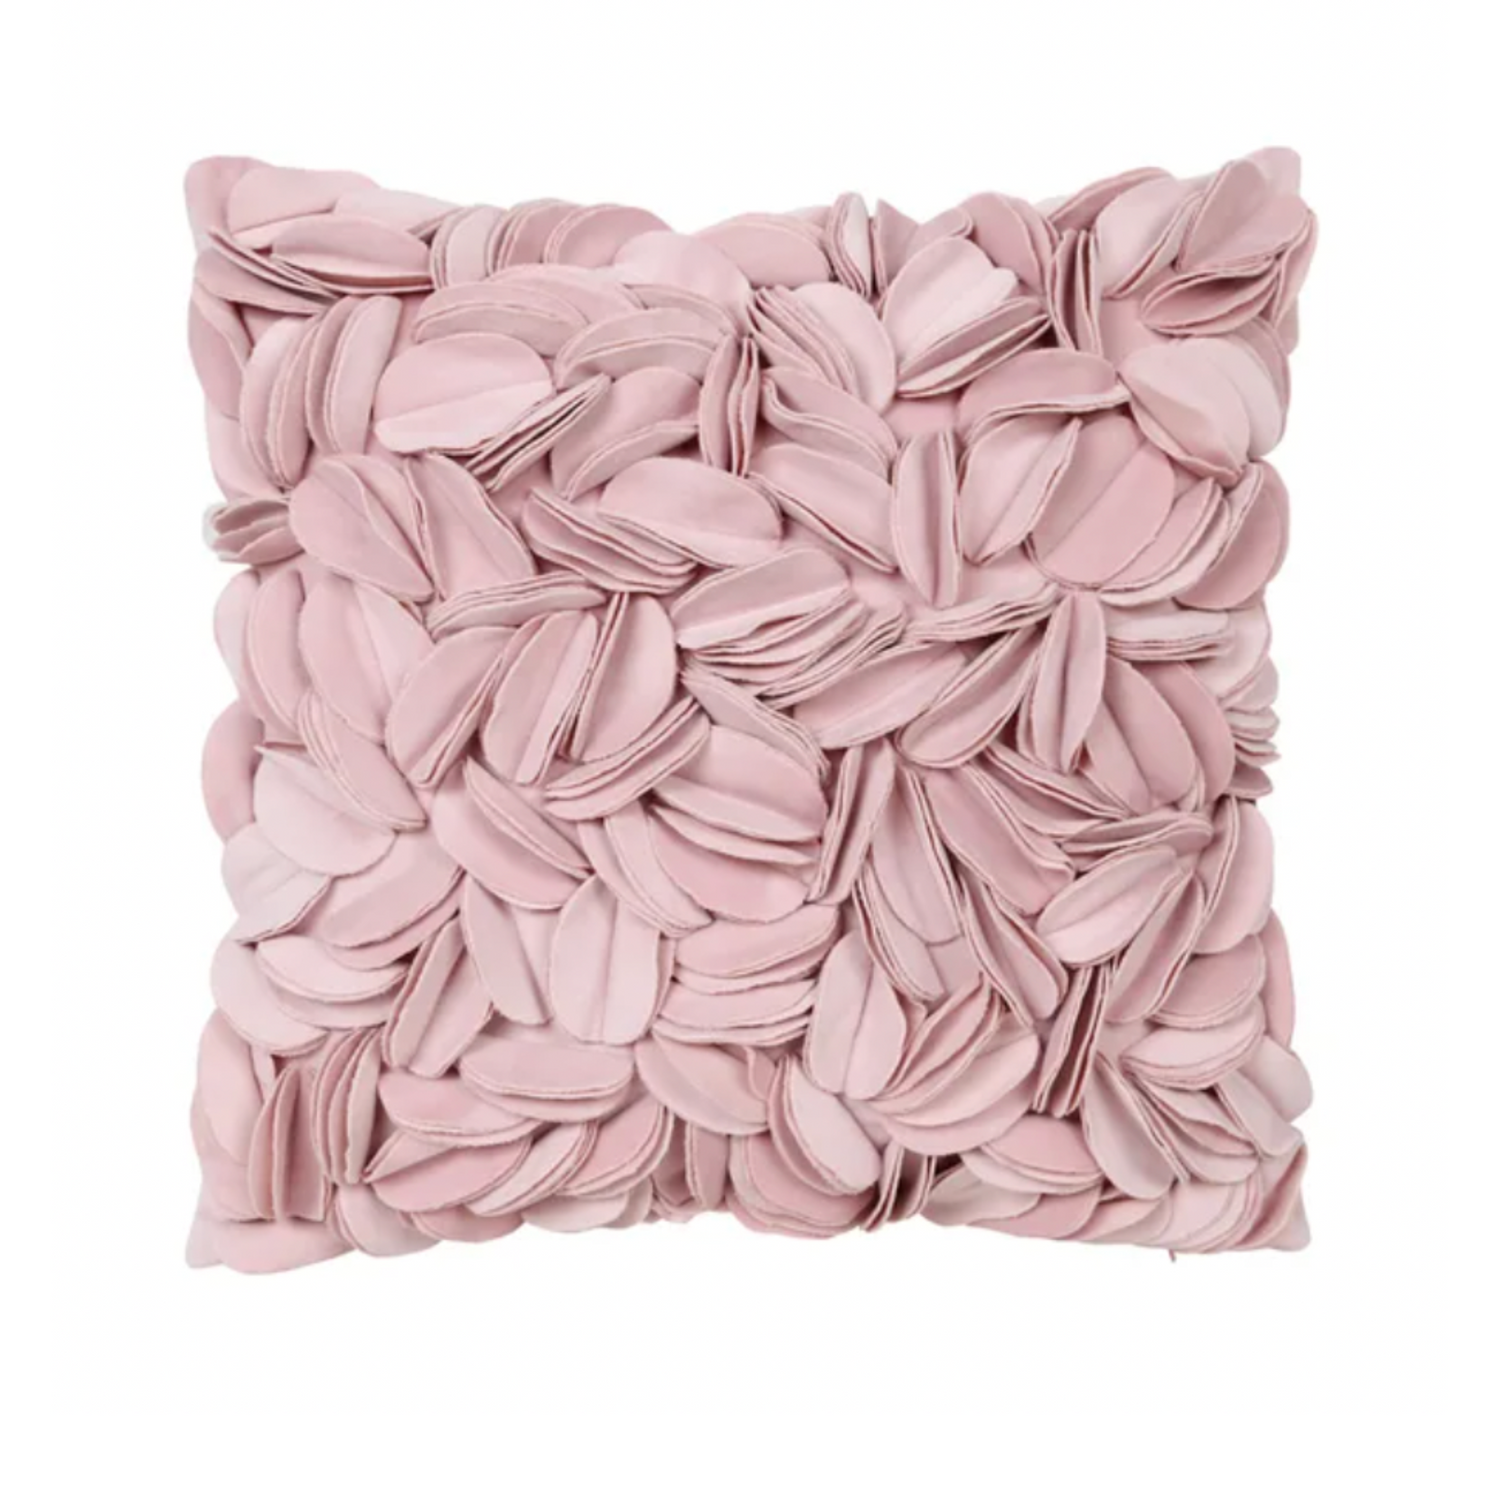 Pink cushion with leaves